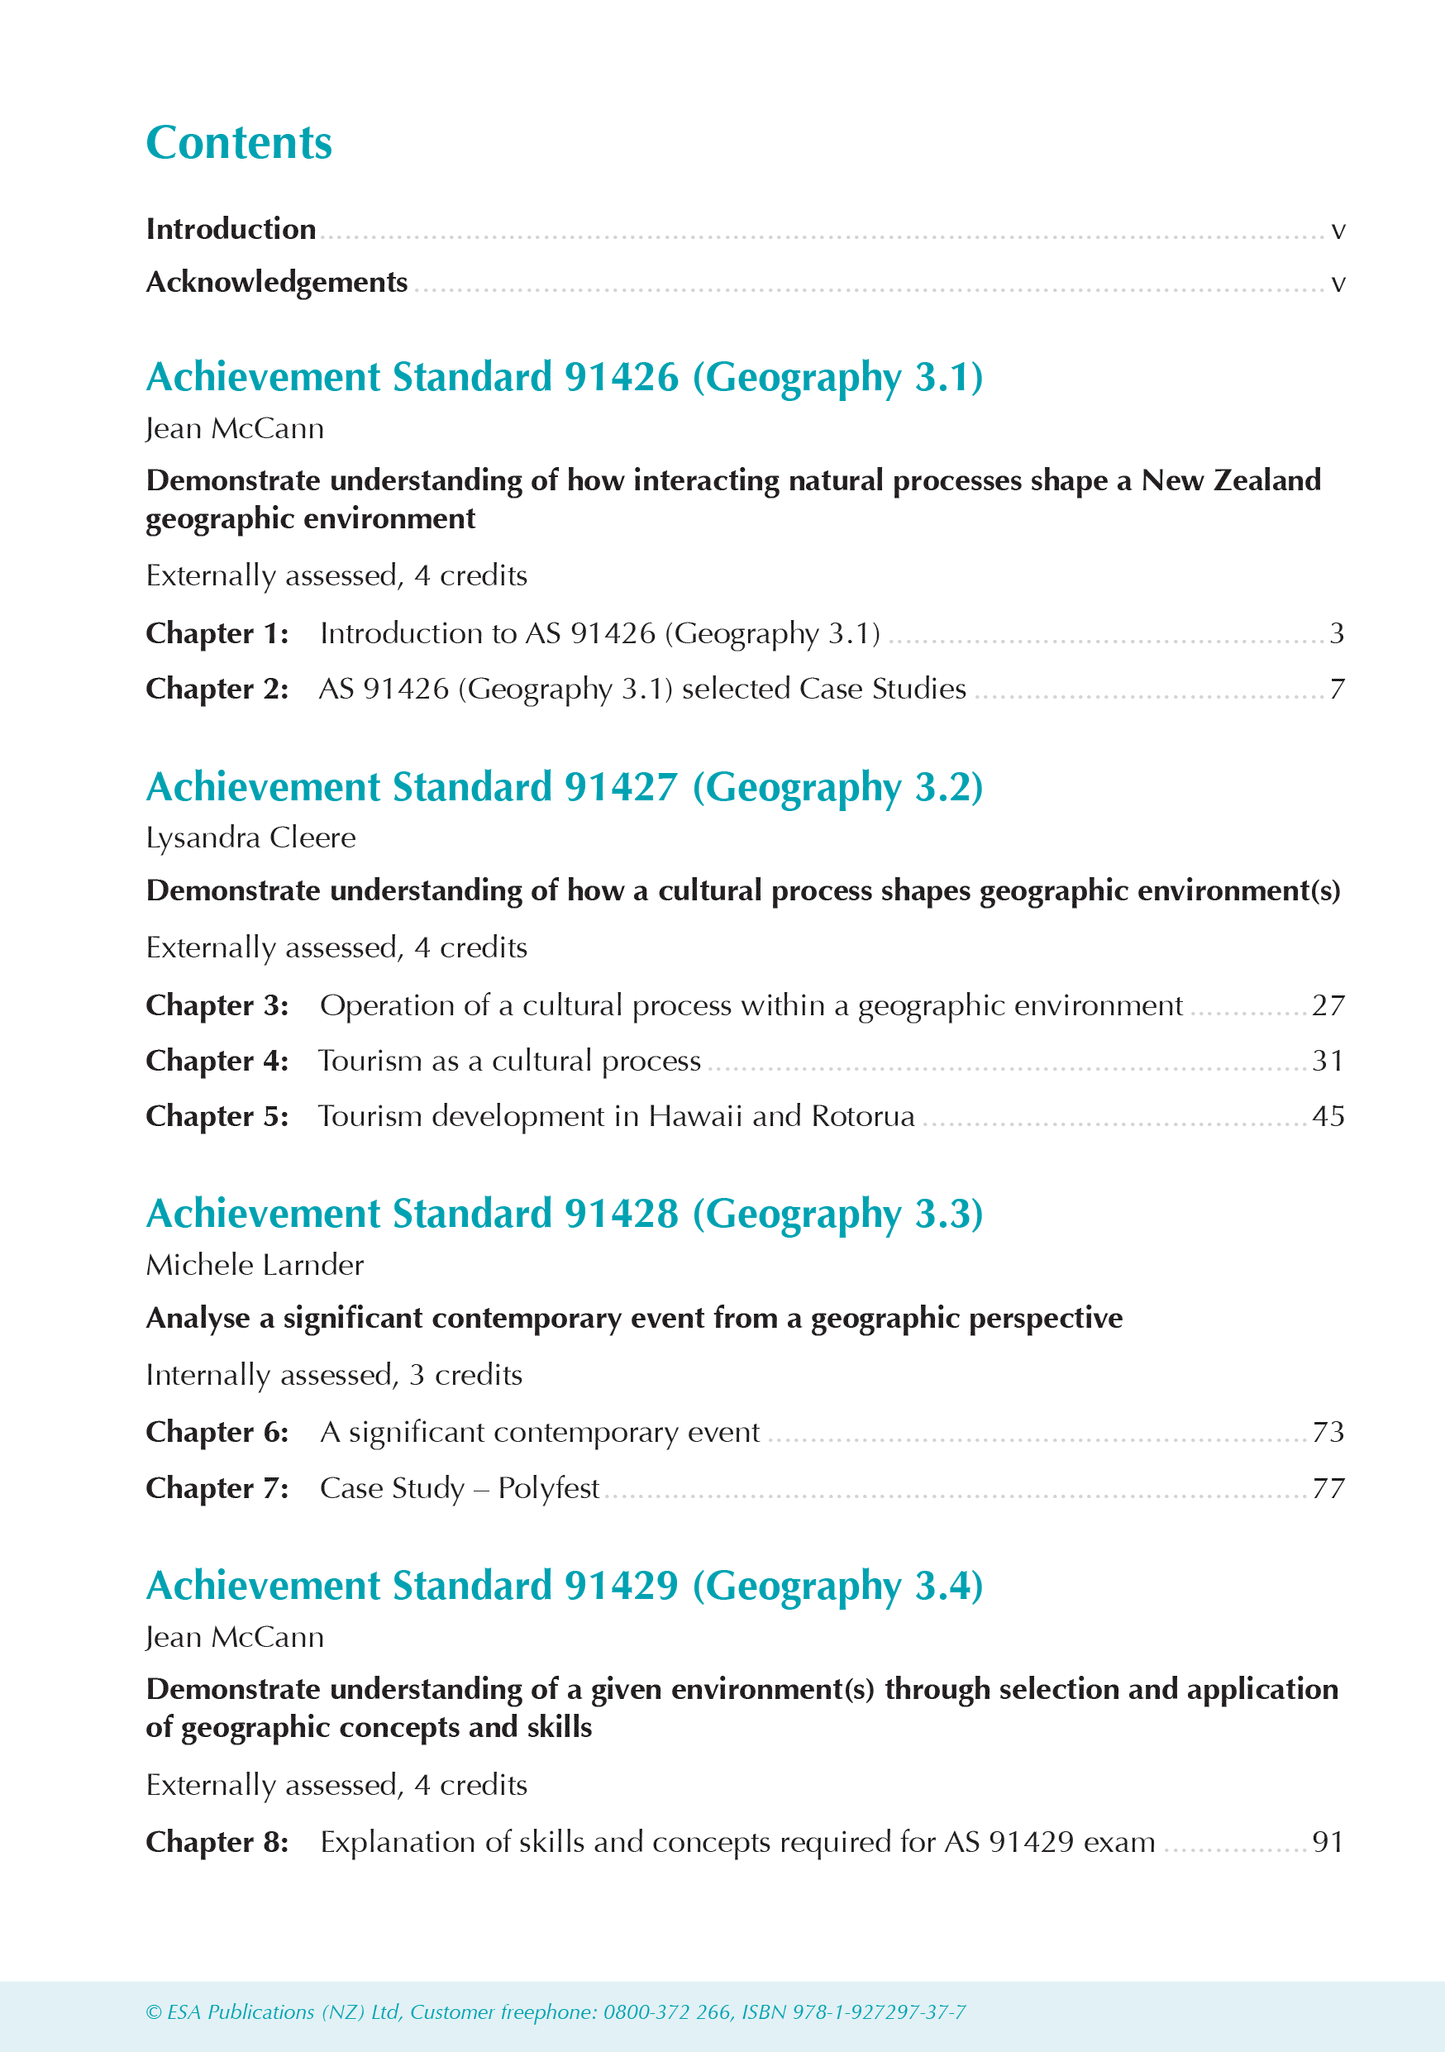 Level 3 Geography ESA Study Guide